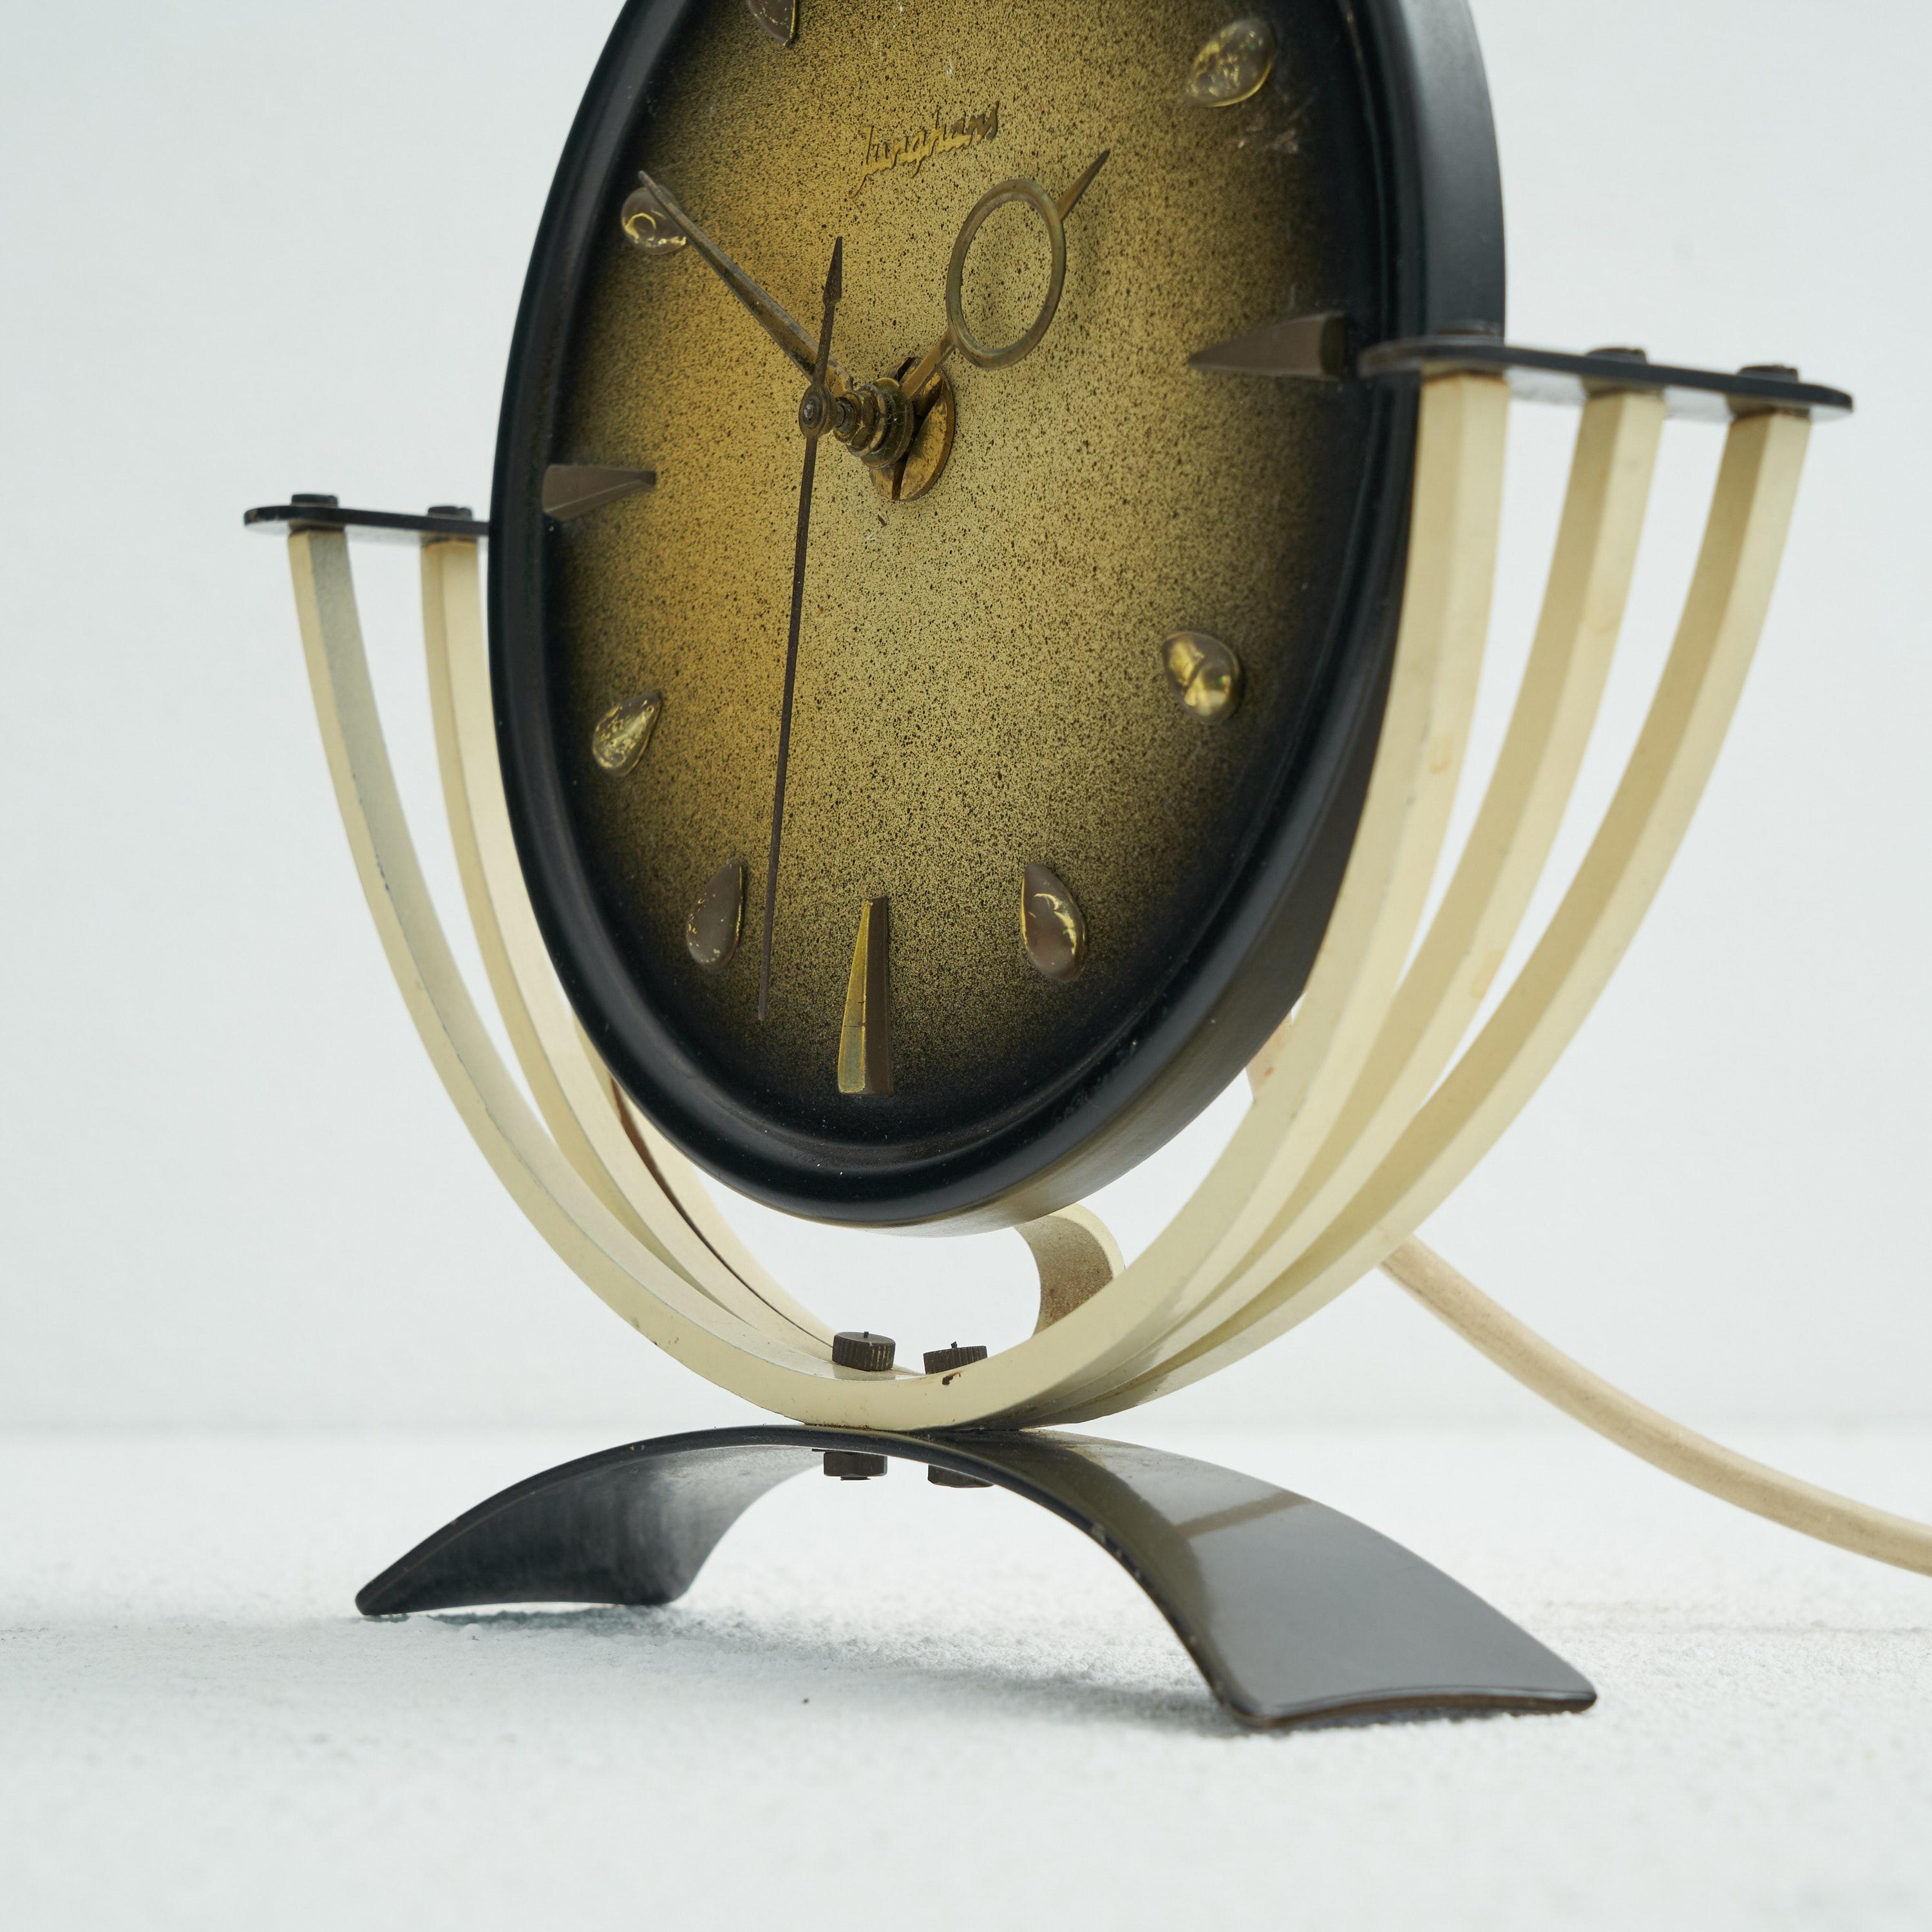 Junghans Mid-Century Table Clock in Metal and Brass, 1950s For Sale 3